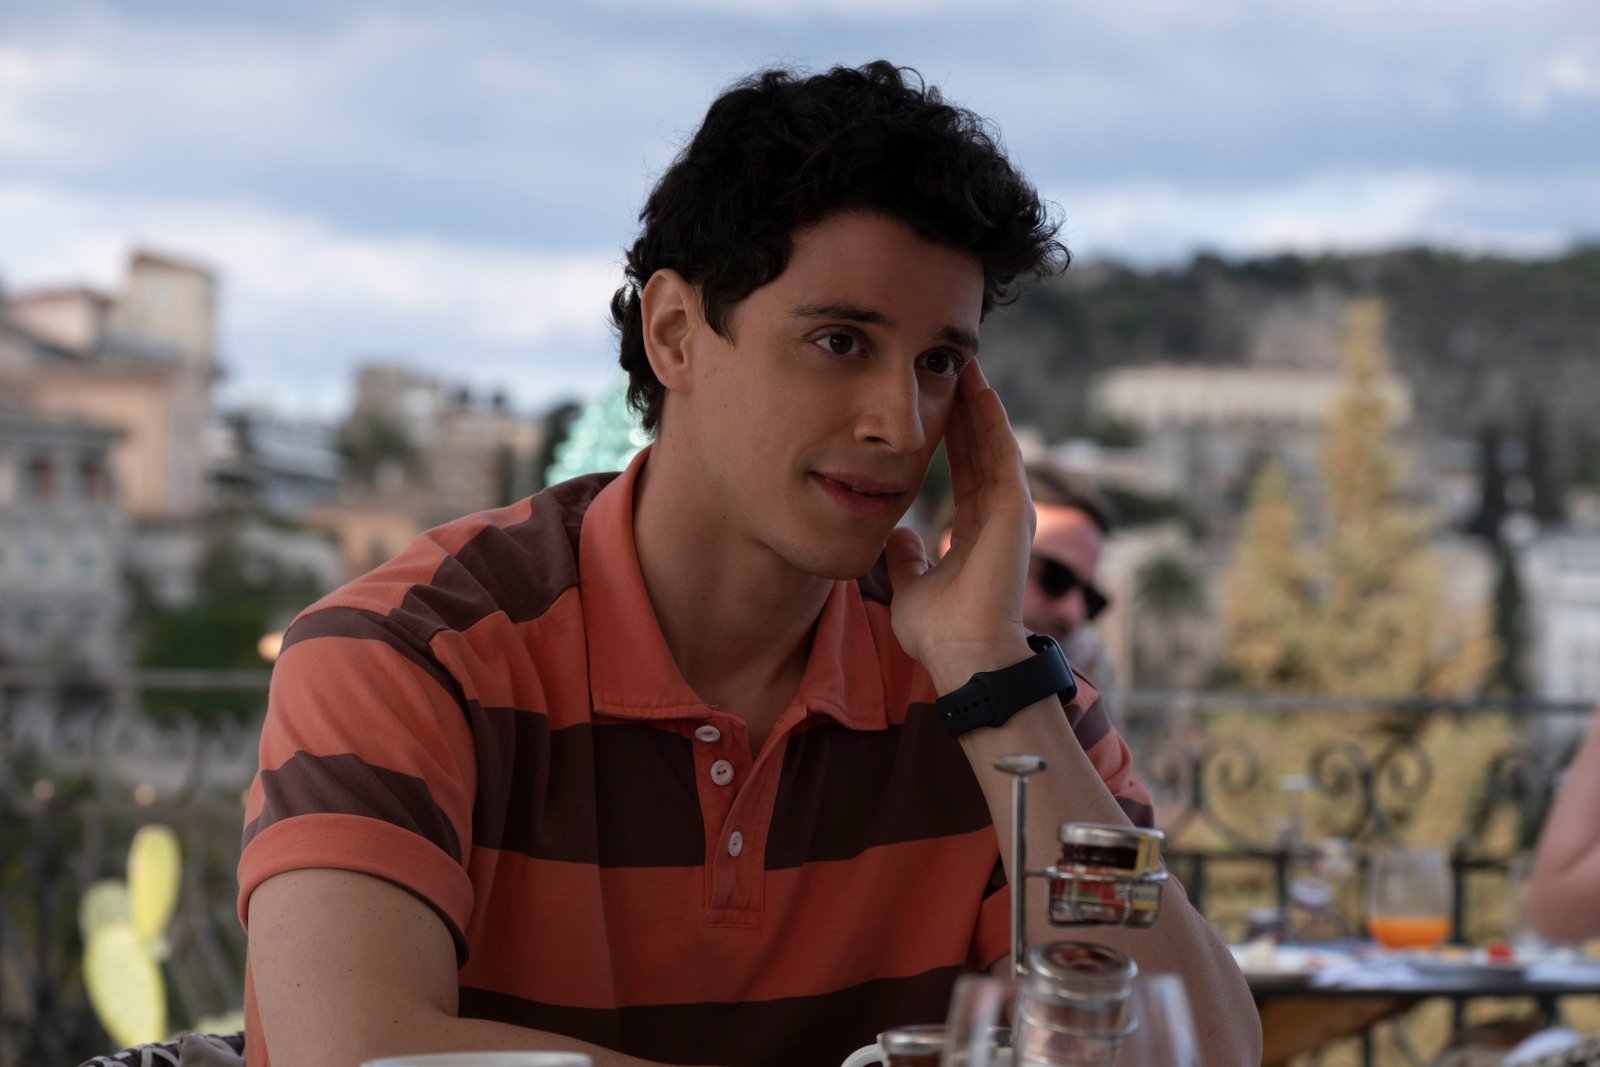 Adam DiMarco as Albie in 'The White Lotus' Season 2. He's sitting at a table and wearing a pink and blue shirt.